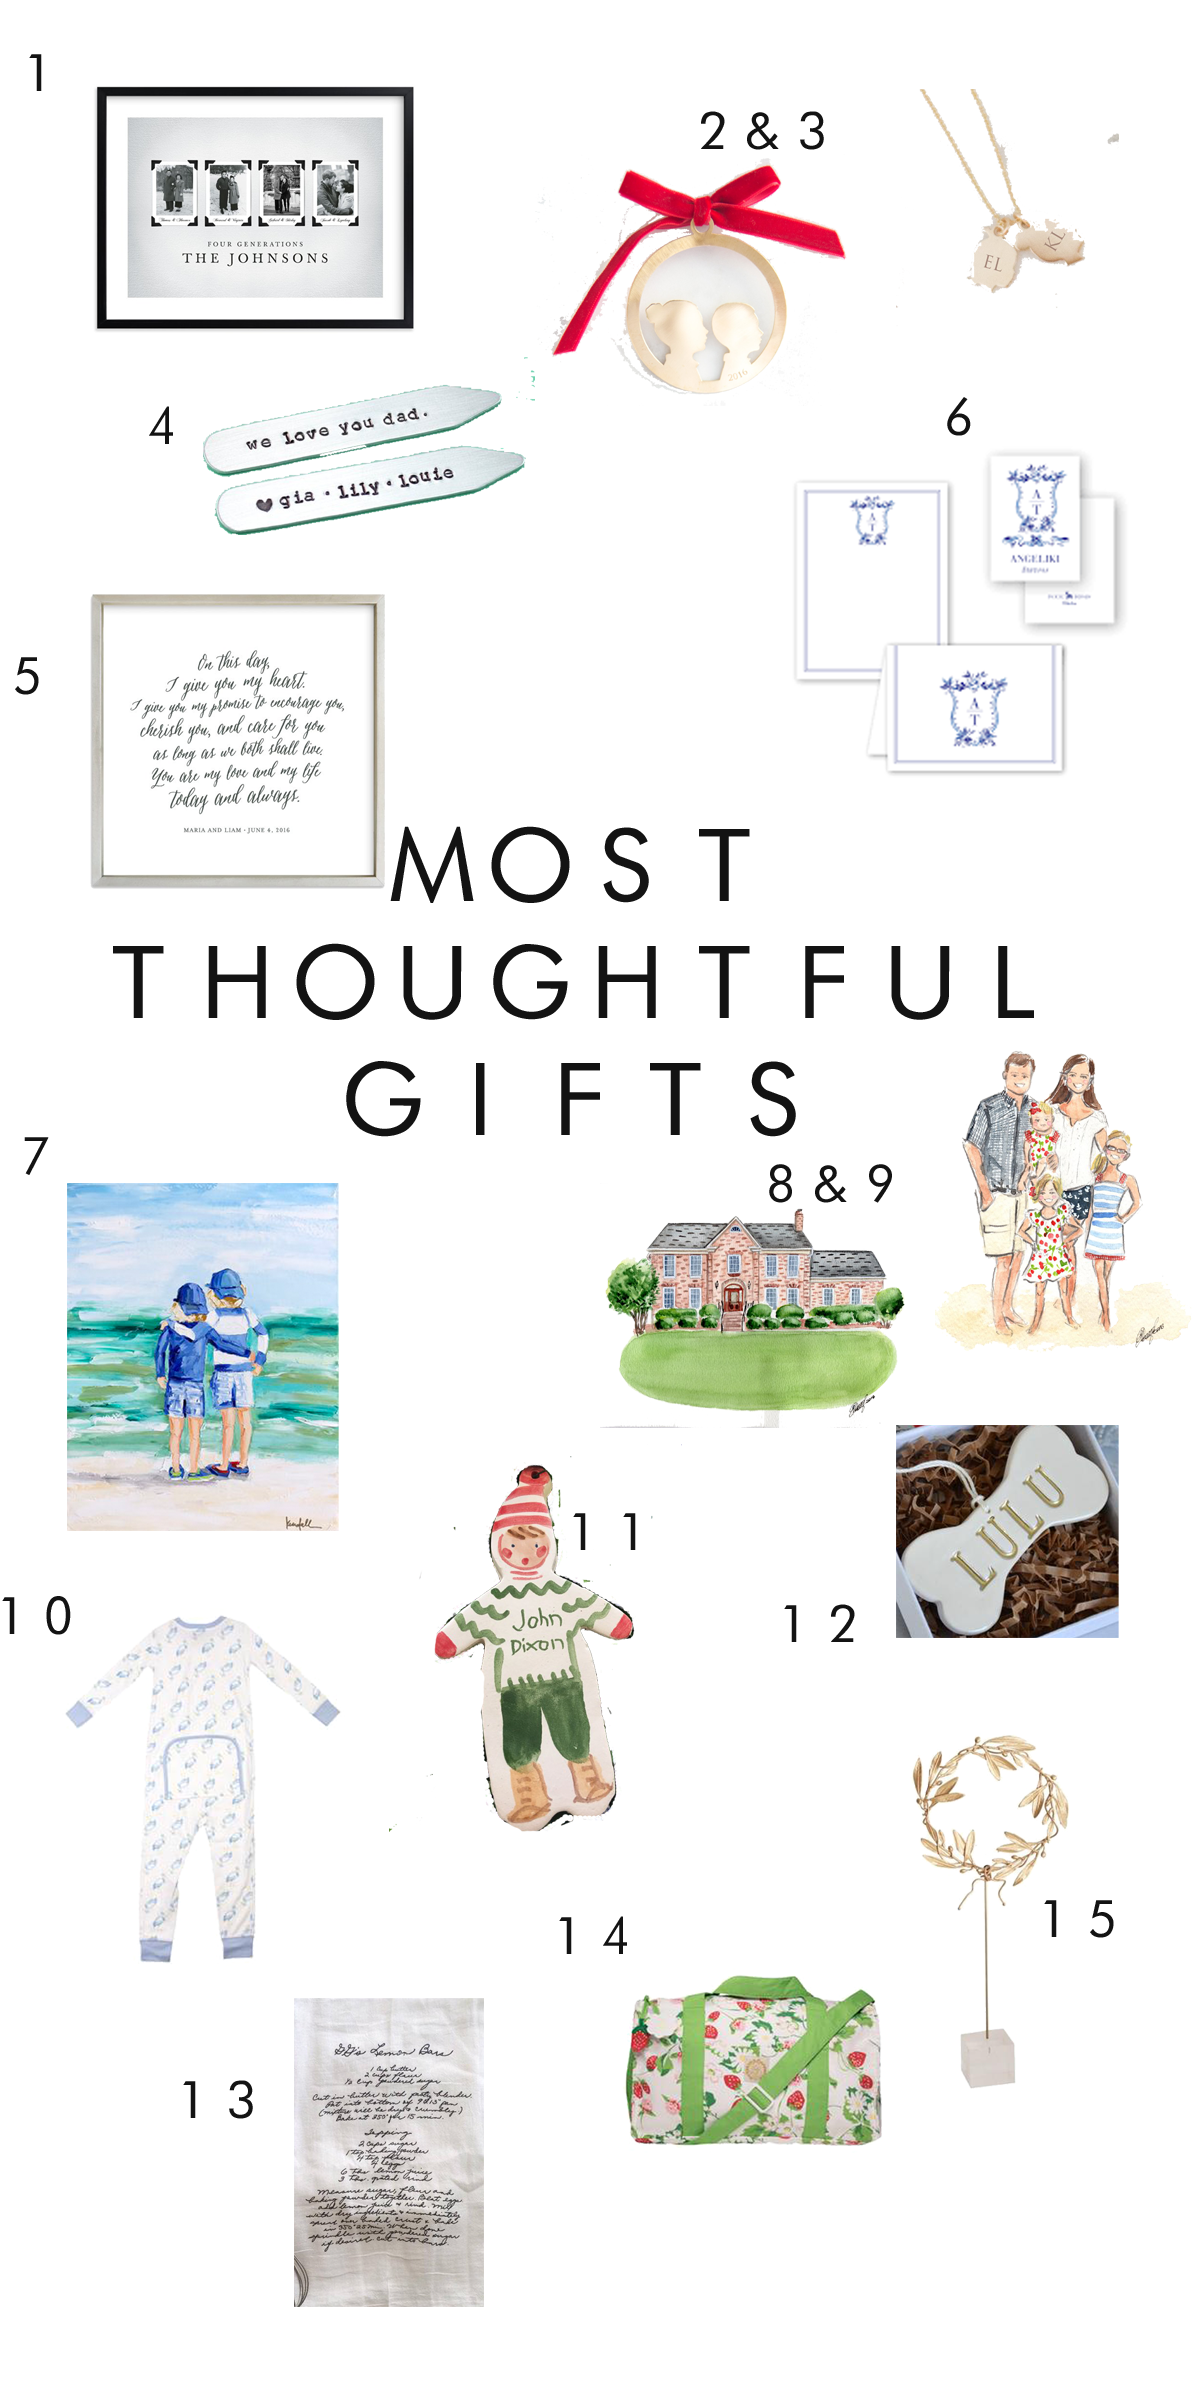 https://sarah-tucker.com/wp-content/uploads/2018/10/the-most-thoughtful-gifts-for-christmas.png